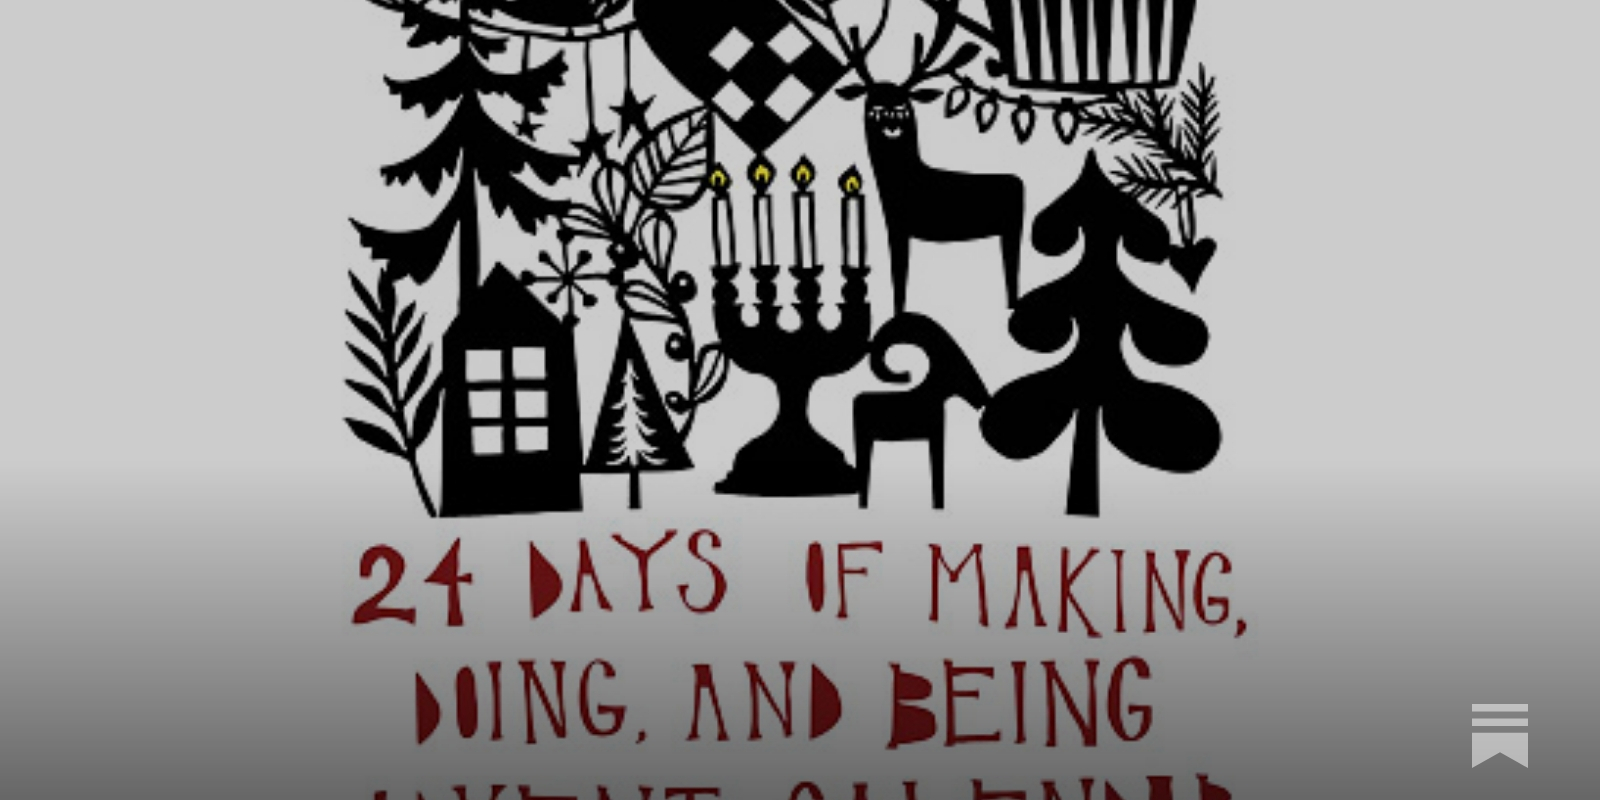 Stitching up daily surprises - because everyday is an adventure. #stit, advent calendar